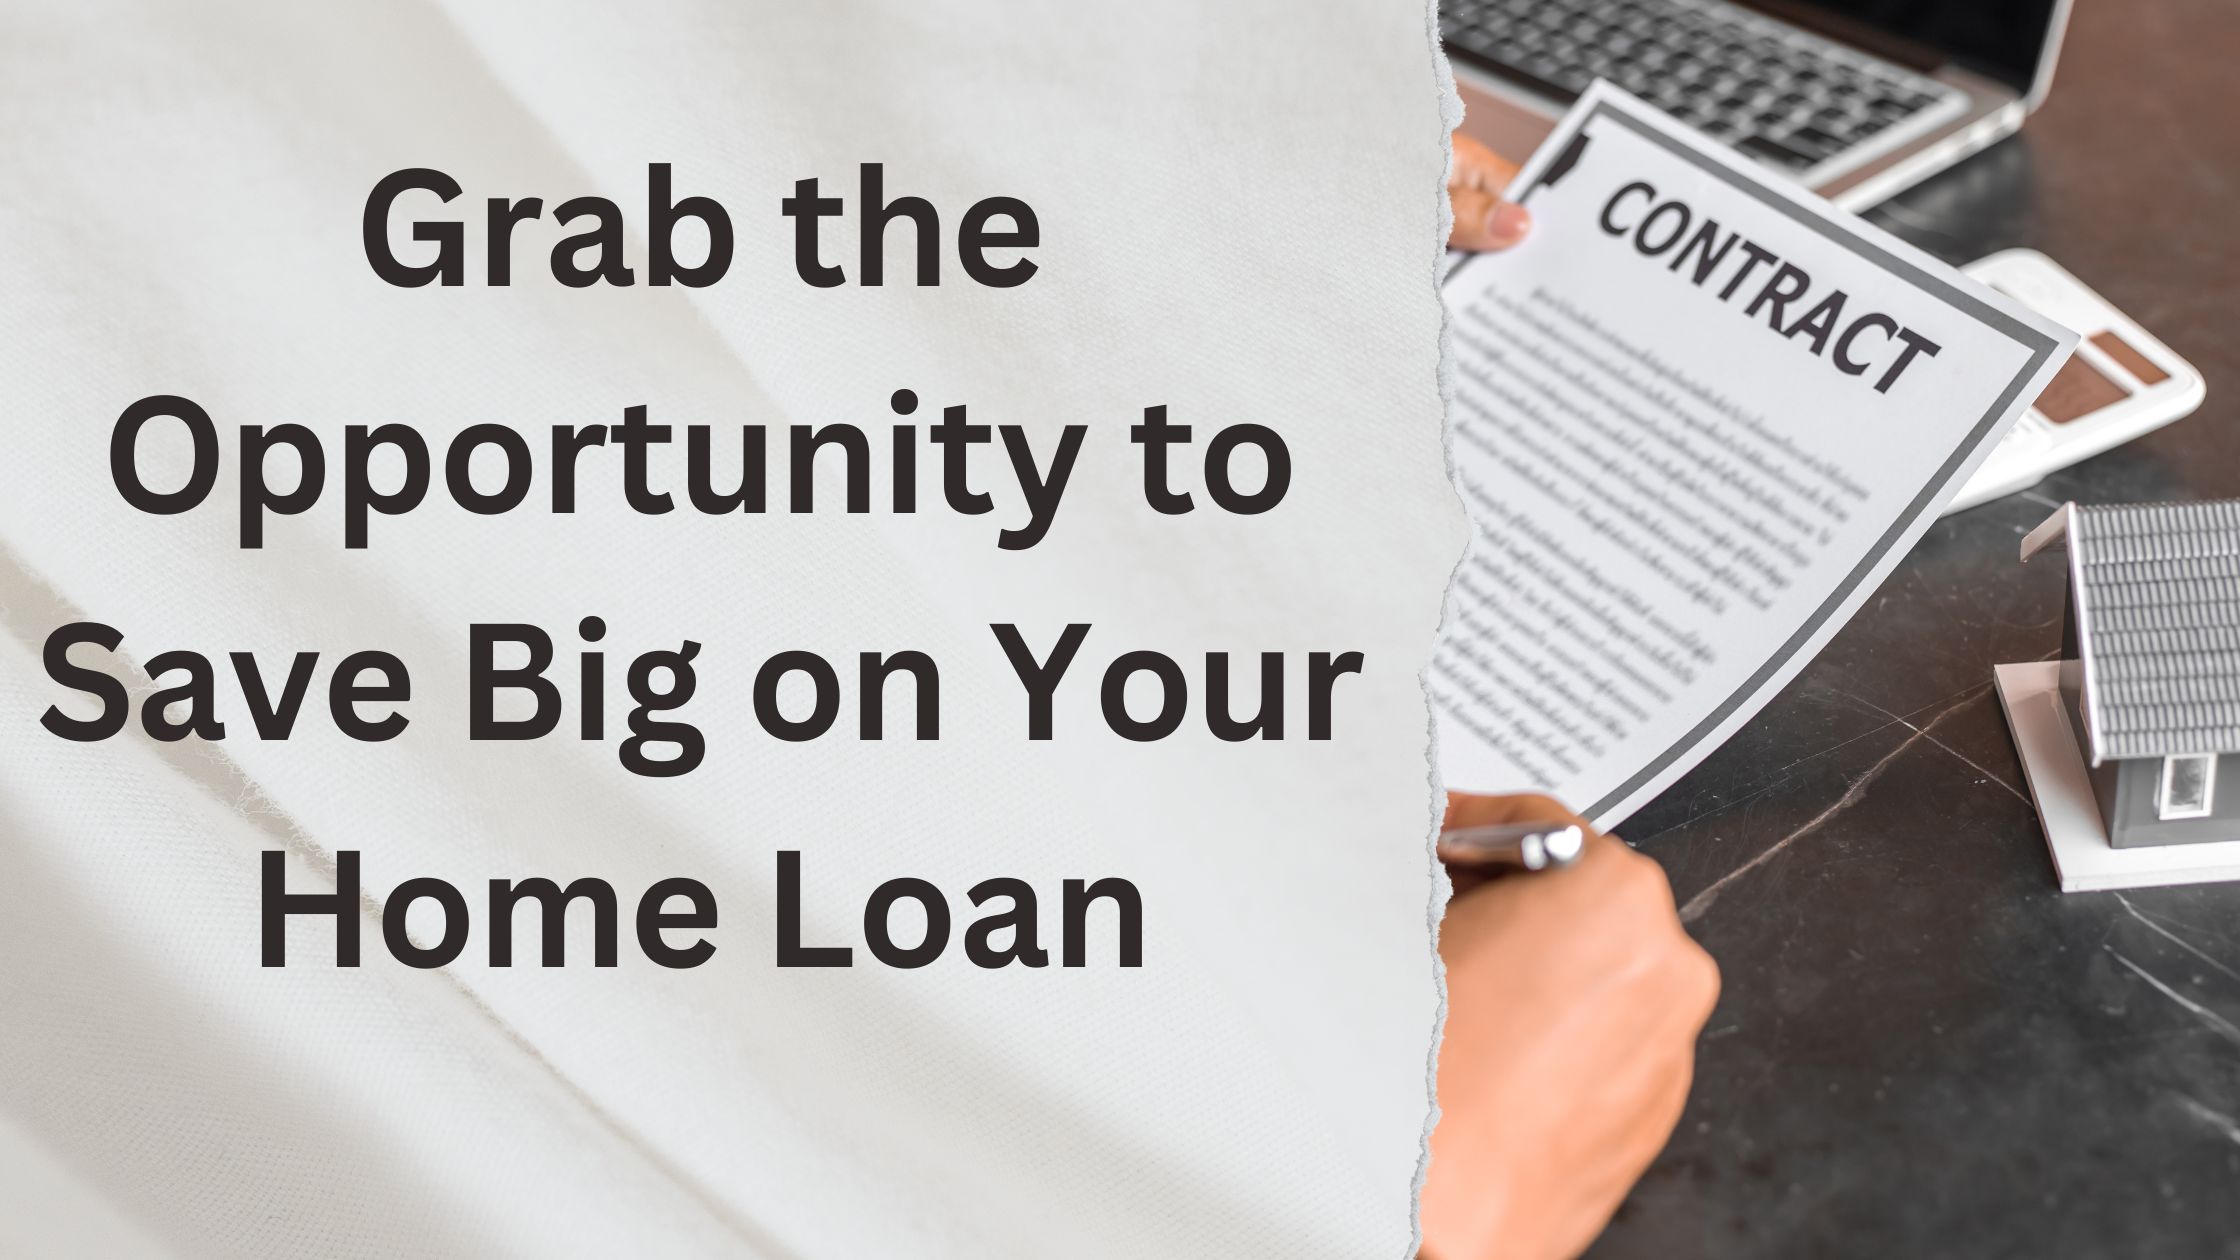 Grab the Opportunity to Save Big on Your Home Loan